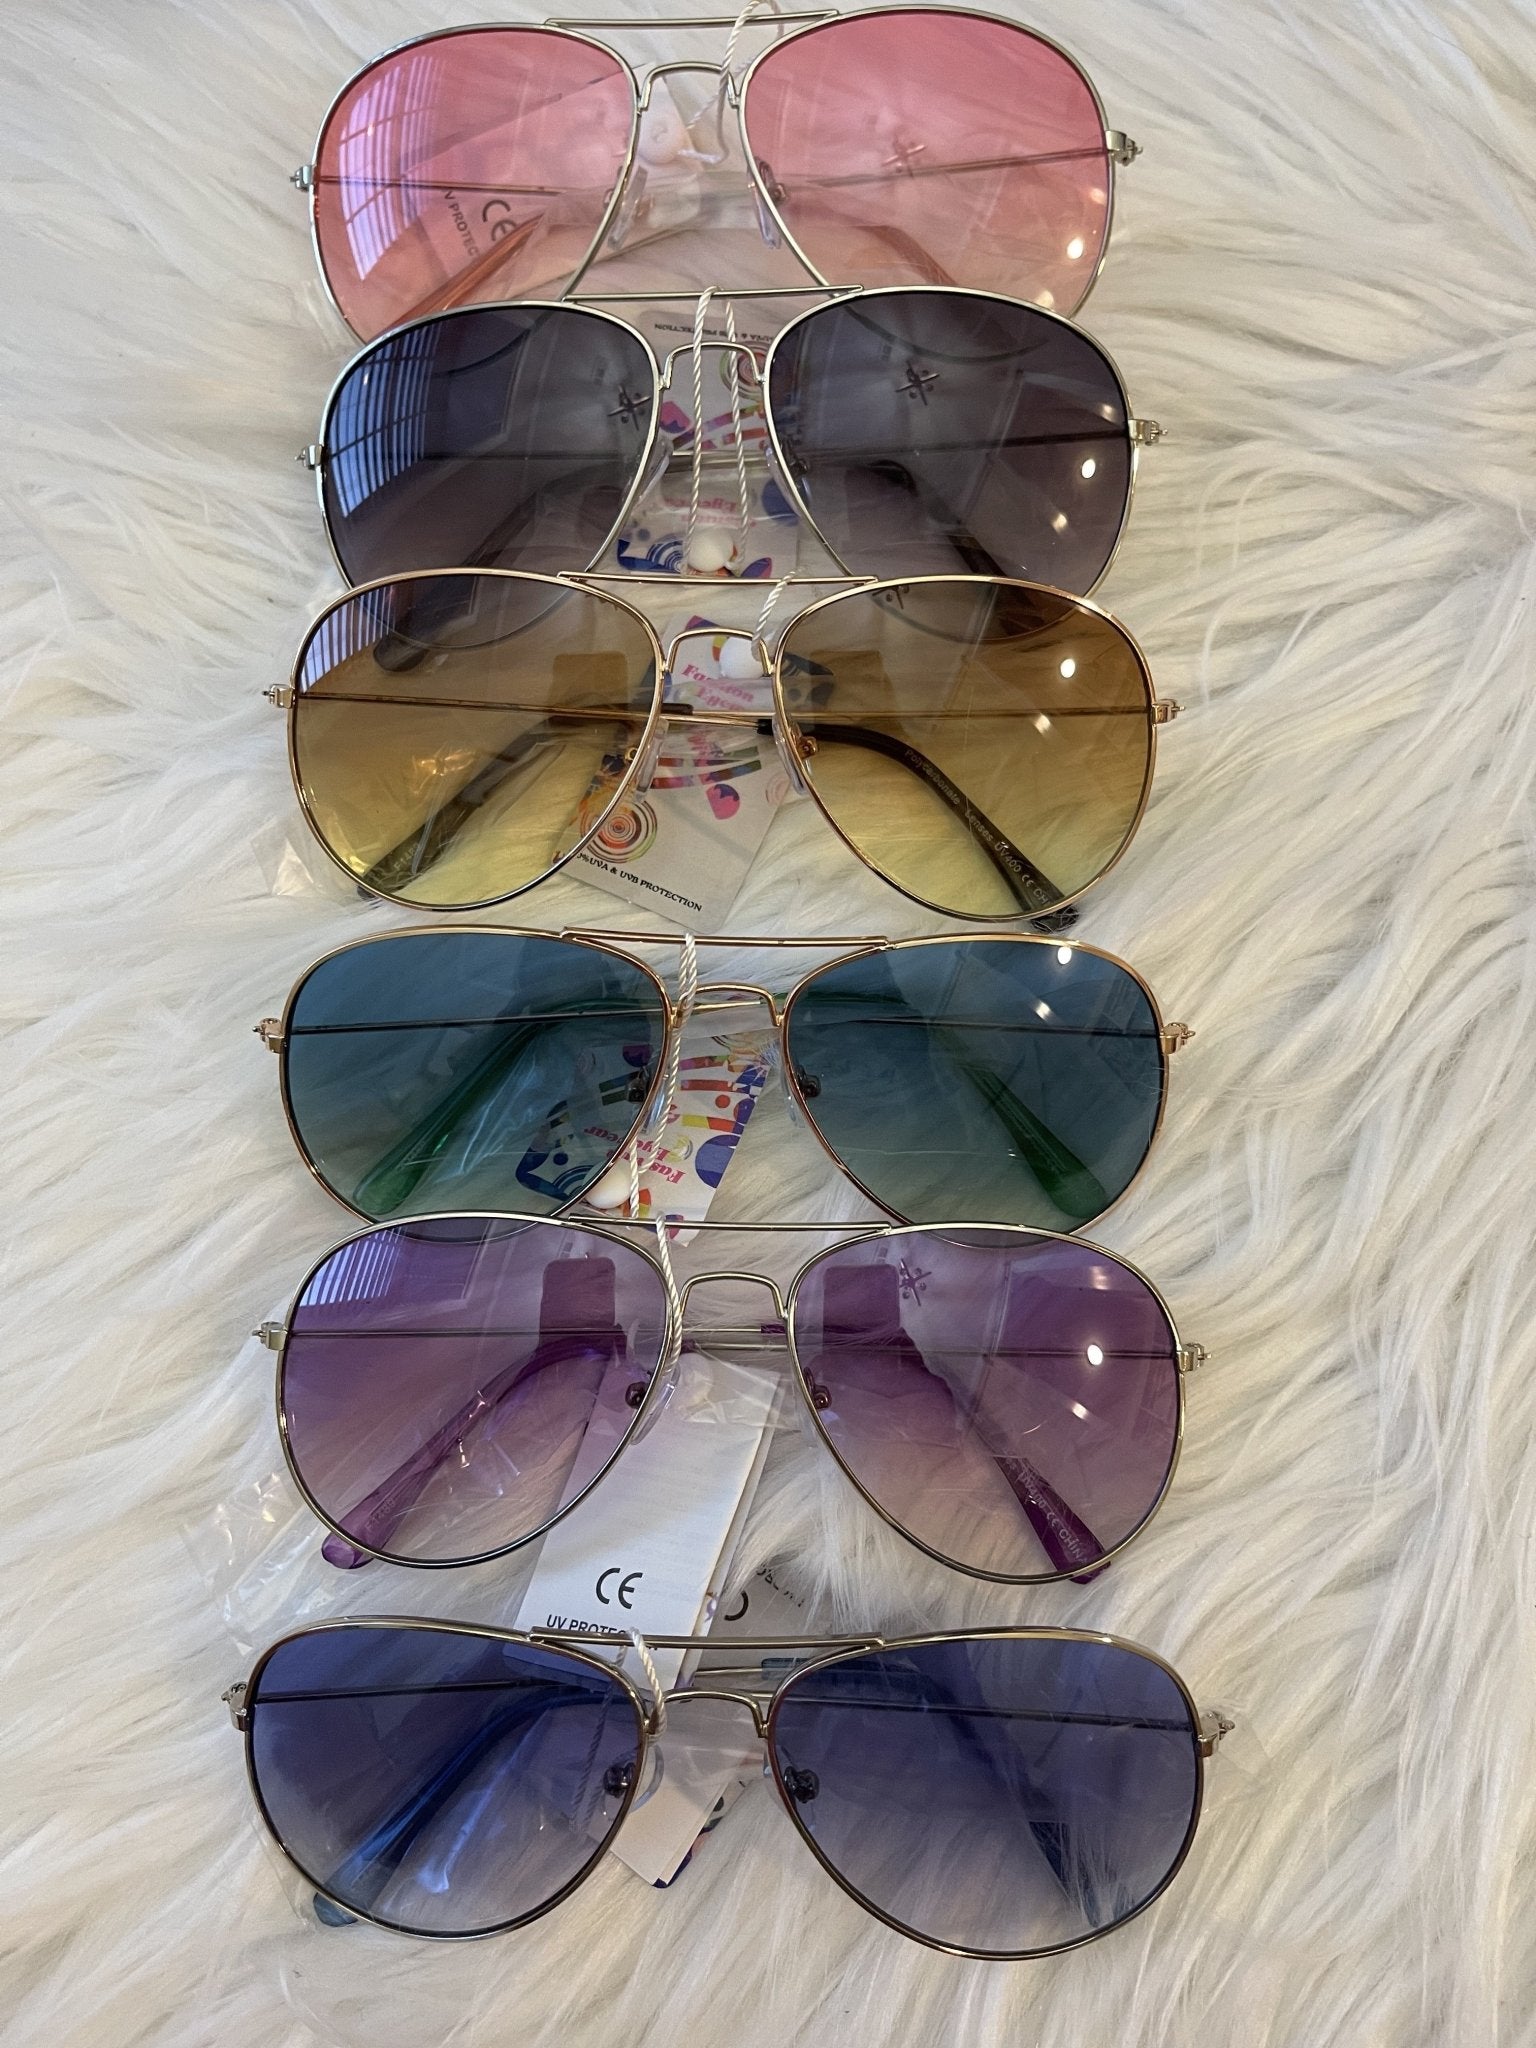 Which Color Today Sunglasses - Charming Cheetah Boutique